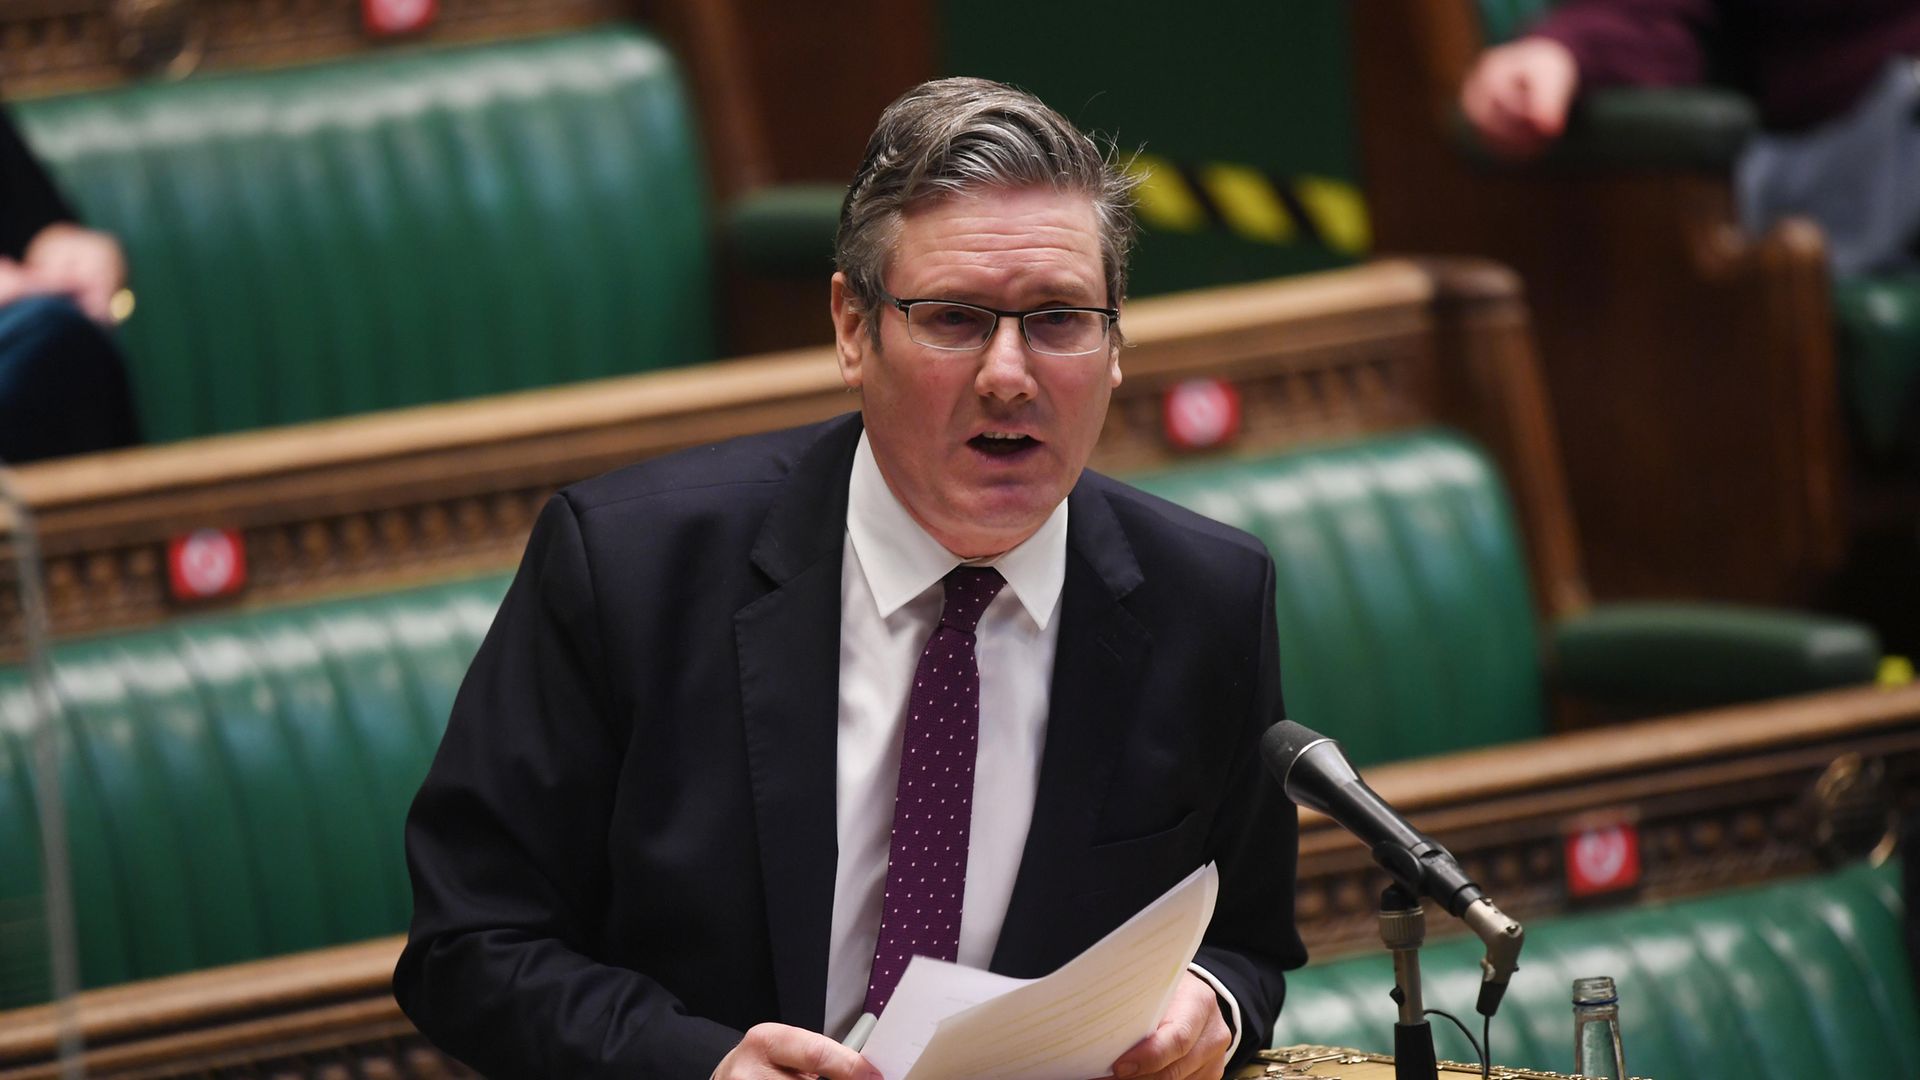 Sir Keir Starmer speaking in the House of Commons - Credit: PA